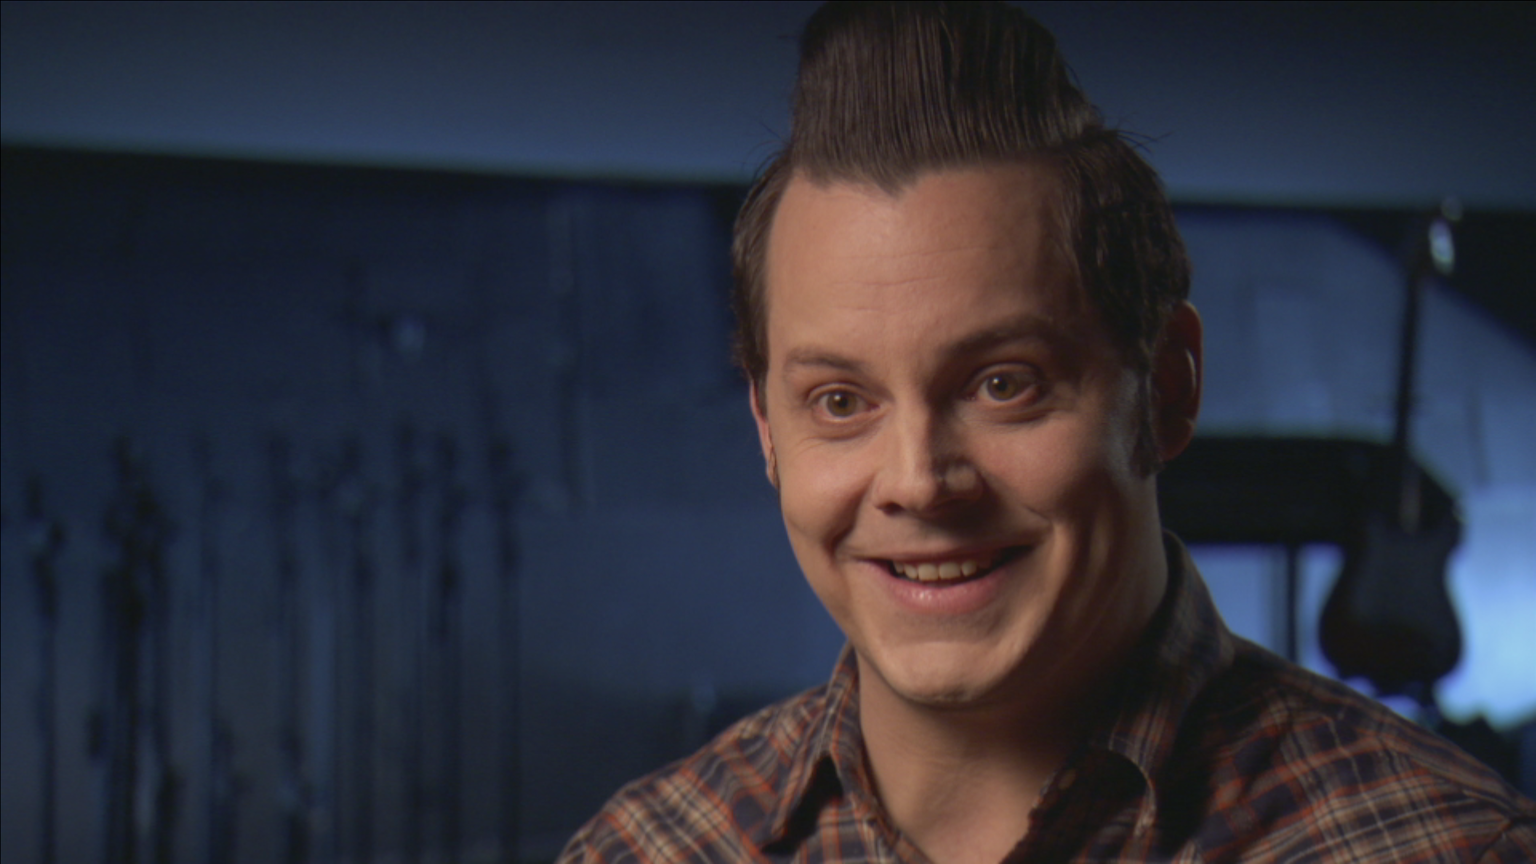 Jack White Songs Ken White of Stripes | & Burns Member PBS Country | Music PBS | the | Biography 